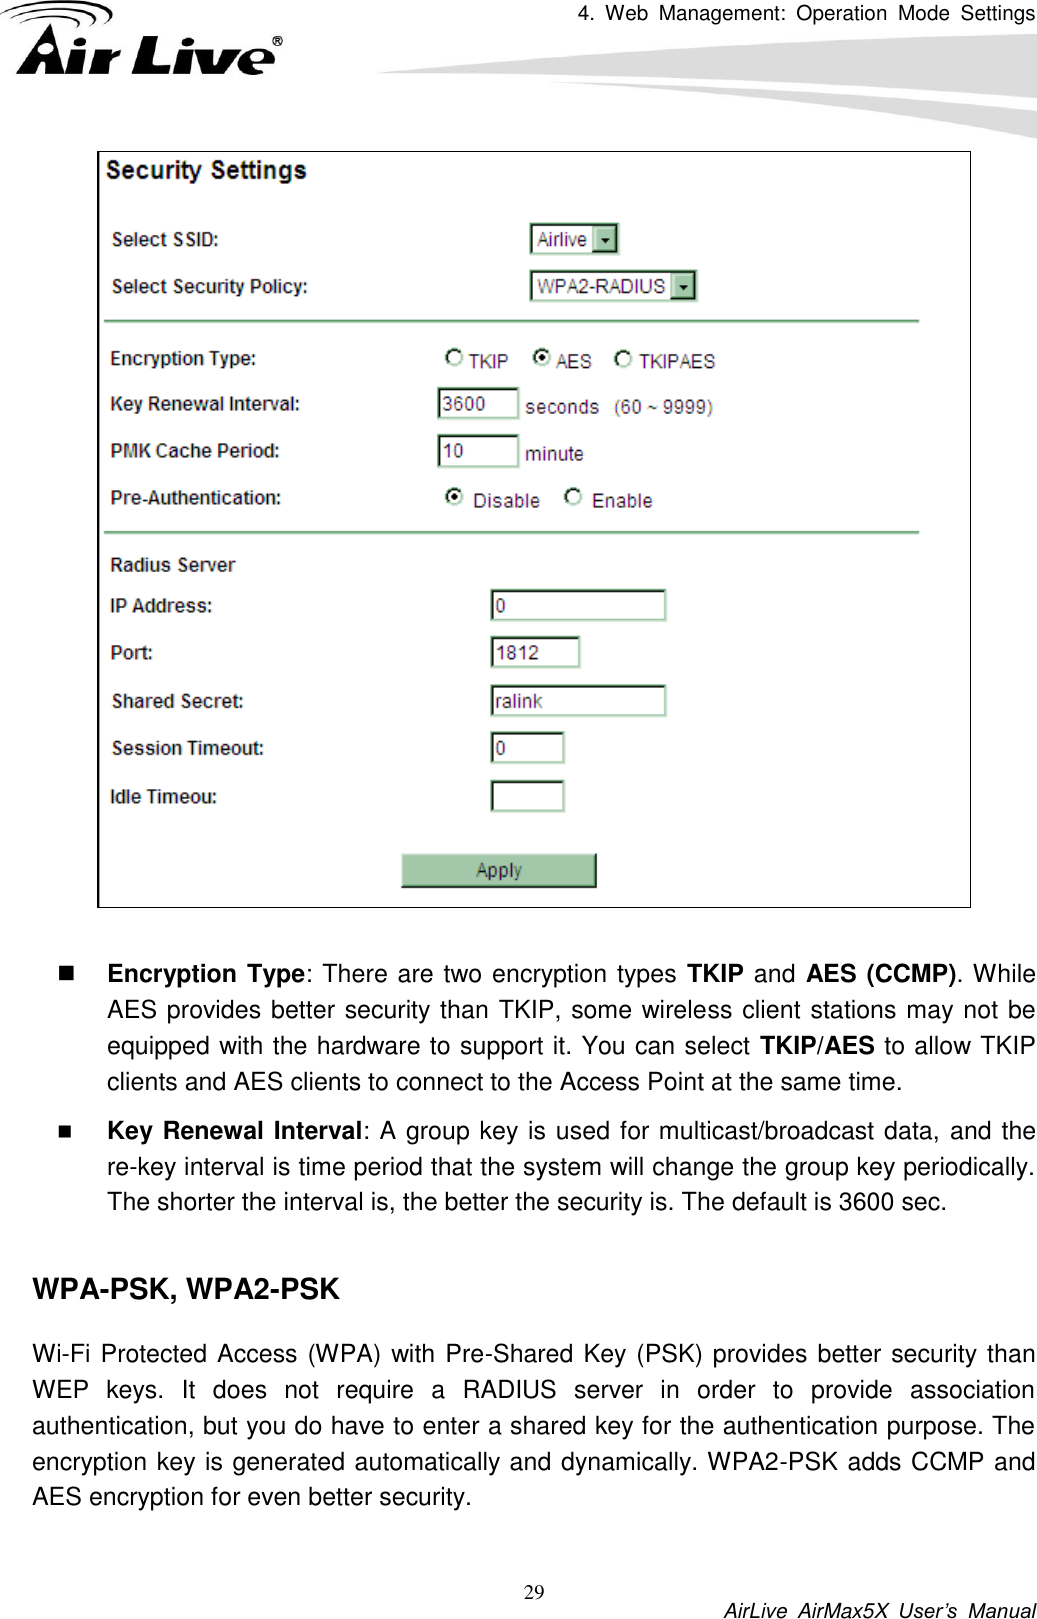 4.  Web  Management:  Operation  Mode  Settings           AirLive  AirMax5X  User’s  Manual 29   Encryption Type: There are two encryption types TKIP and AES (CCMP). While AES provides better security than TKIP, some wireless client stations may not be equipped with the hardware to support it. You can select TKIP/AES to allow TKIP clients and AES clients to connect to the Access Point at the same time.    Key Renewal Interval: A group key is used for multicast/broadcast data, and the re-key interval is time period that the system will change the group key periodically. The shorter the interval is, the better the security is. The default is 3600 sec.  WPA-PSK, WPA2-PSK Wi-Fi Protected Access (WPA) with Pre-Shared Key (PSK) provides better security than WEP  keys.  It  does  not  require  a  RADIUS  server  in  order  to  provide  association authentication, but you do have to enter a shared key for the authentication purpose. The encryption key is generated automatically and dynamically. WPA2-PSK adds CCMP and AES encryption for even better security.    